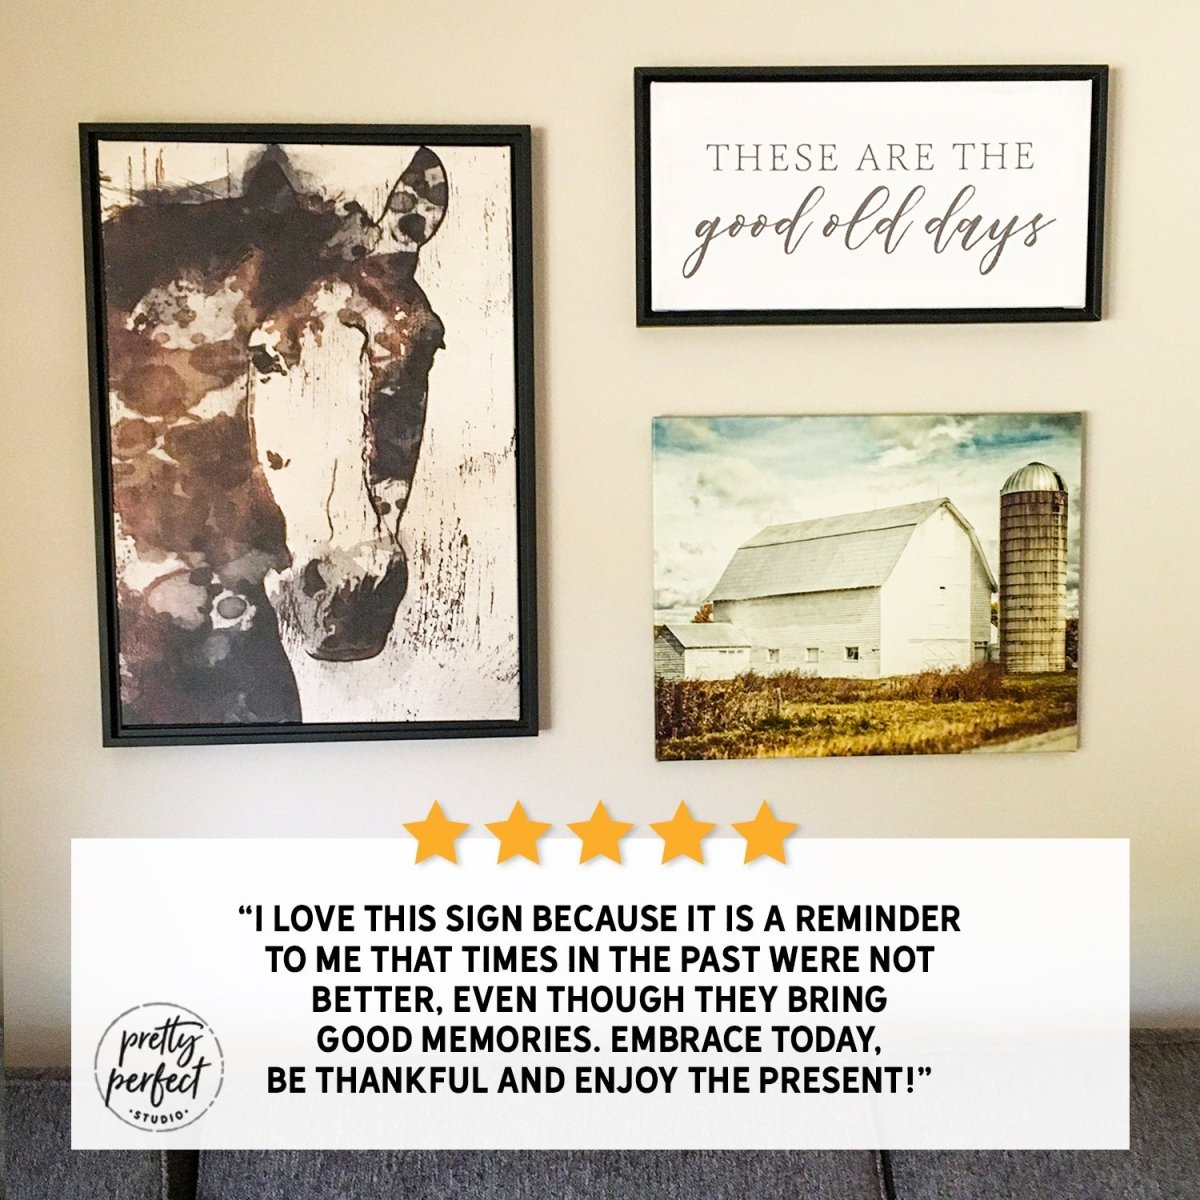 Customer product review for these are the good old days wall art by Pretty Perfect Studio